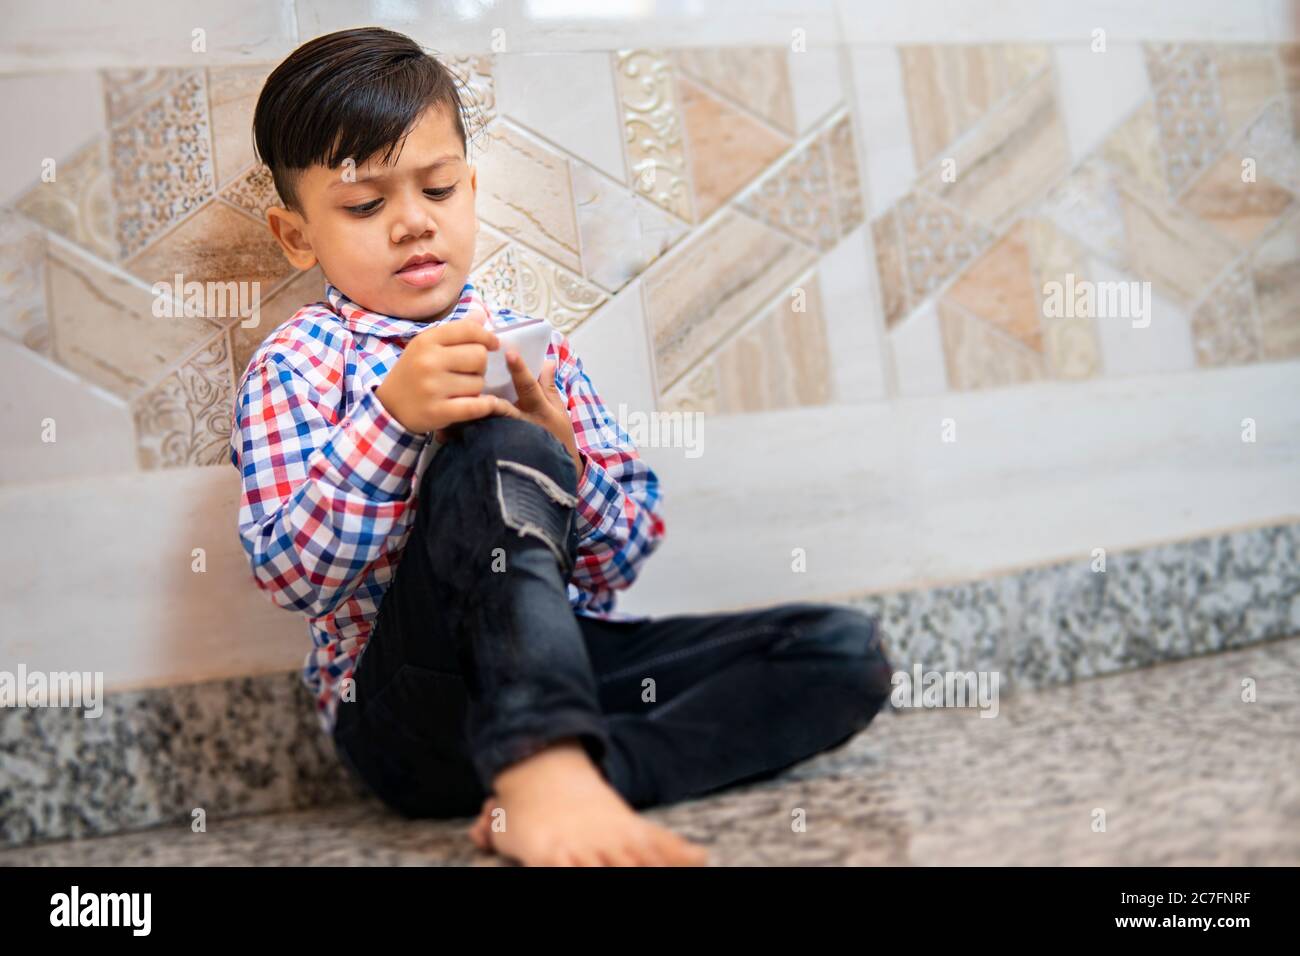 Indoor image of little boy using smartphone and playing video game in leisure time. Stock Photo